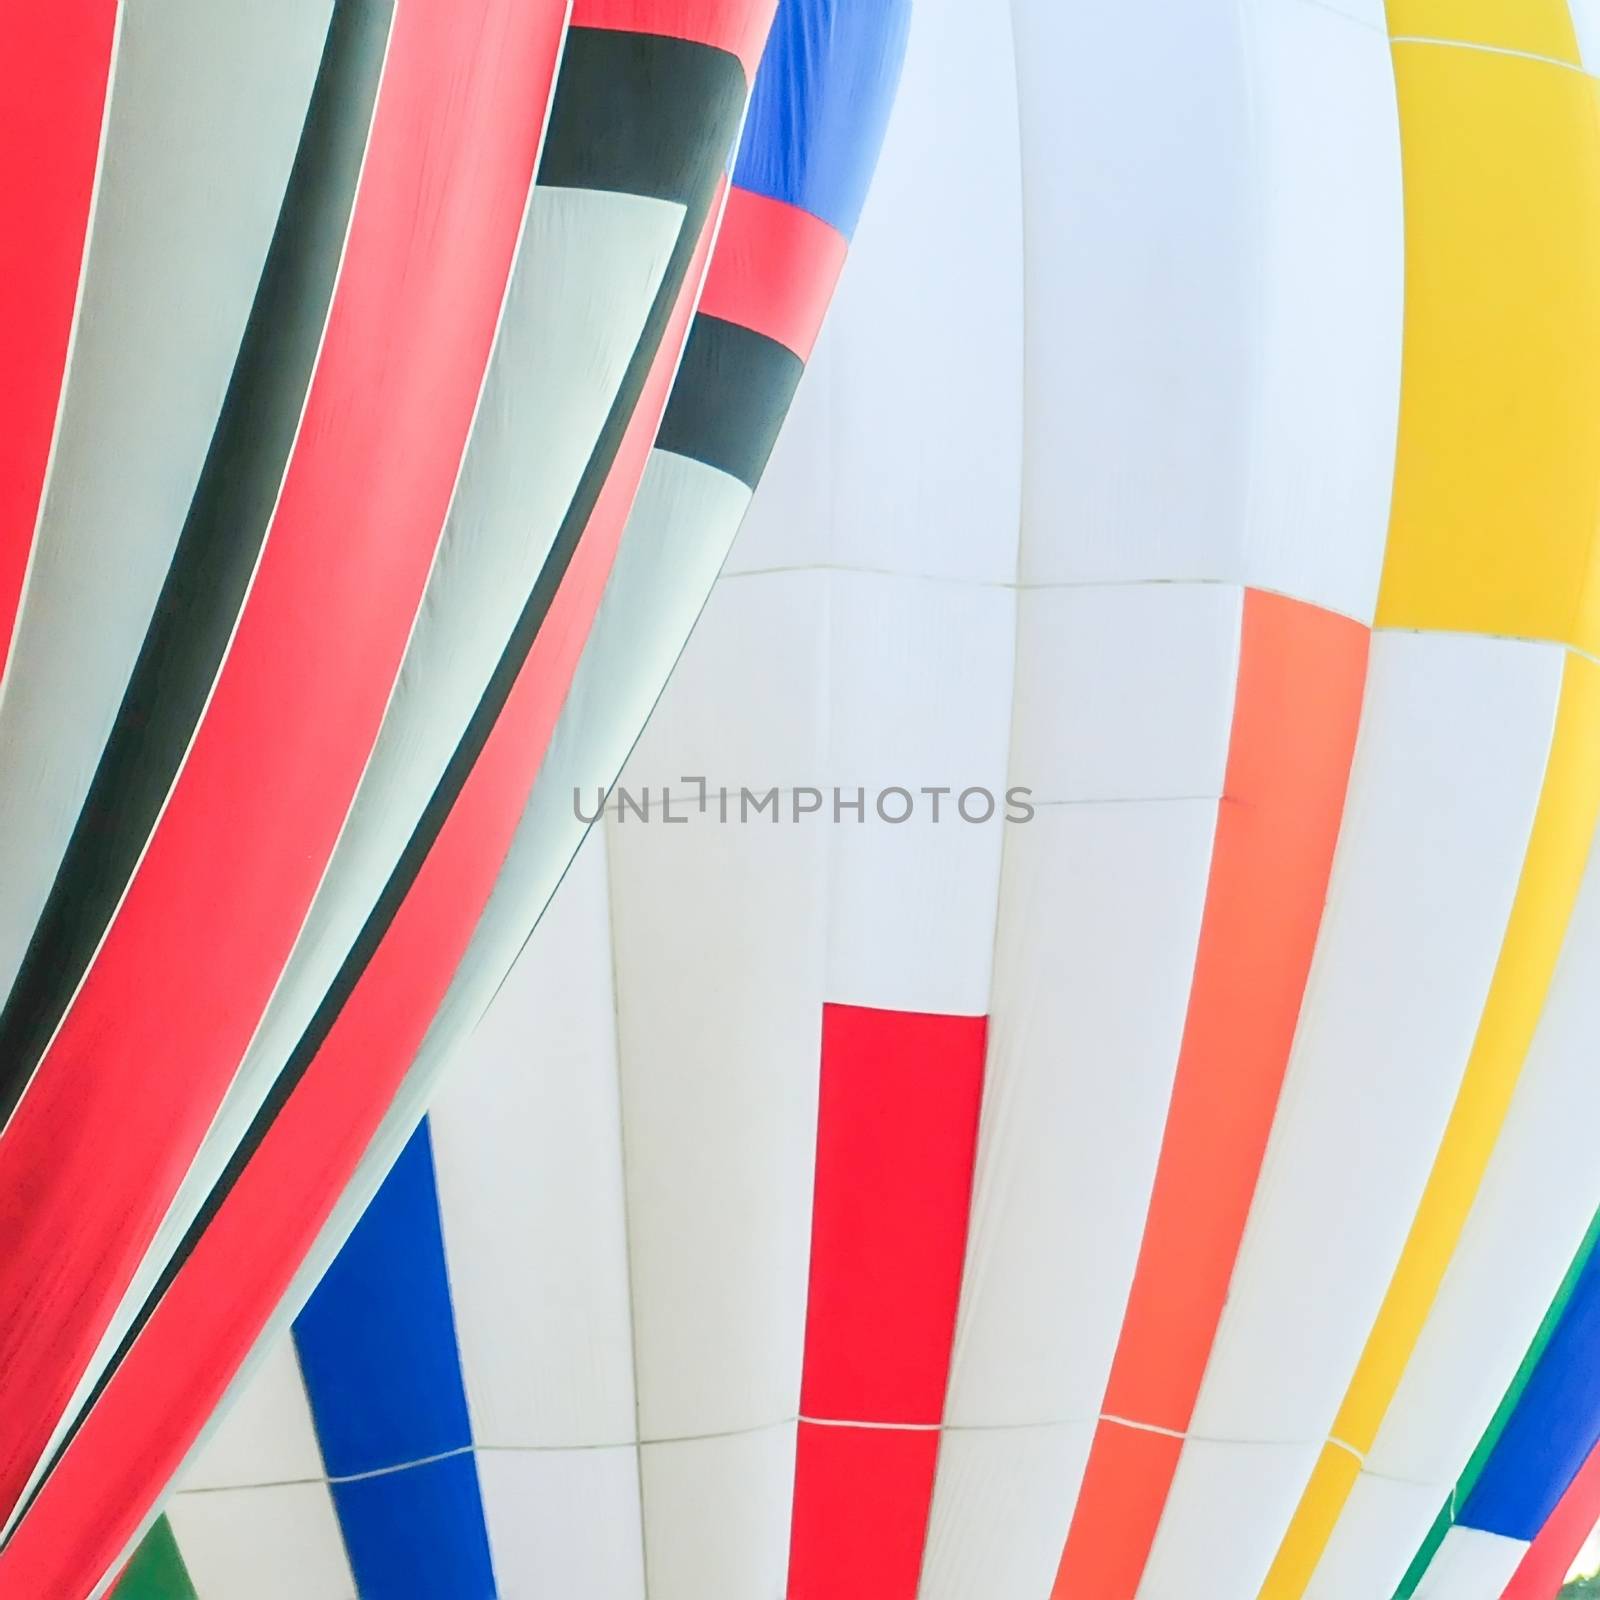 Colorful hot air balloon lines and curves